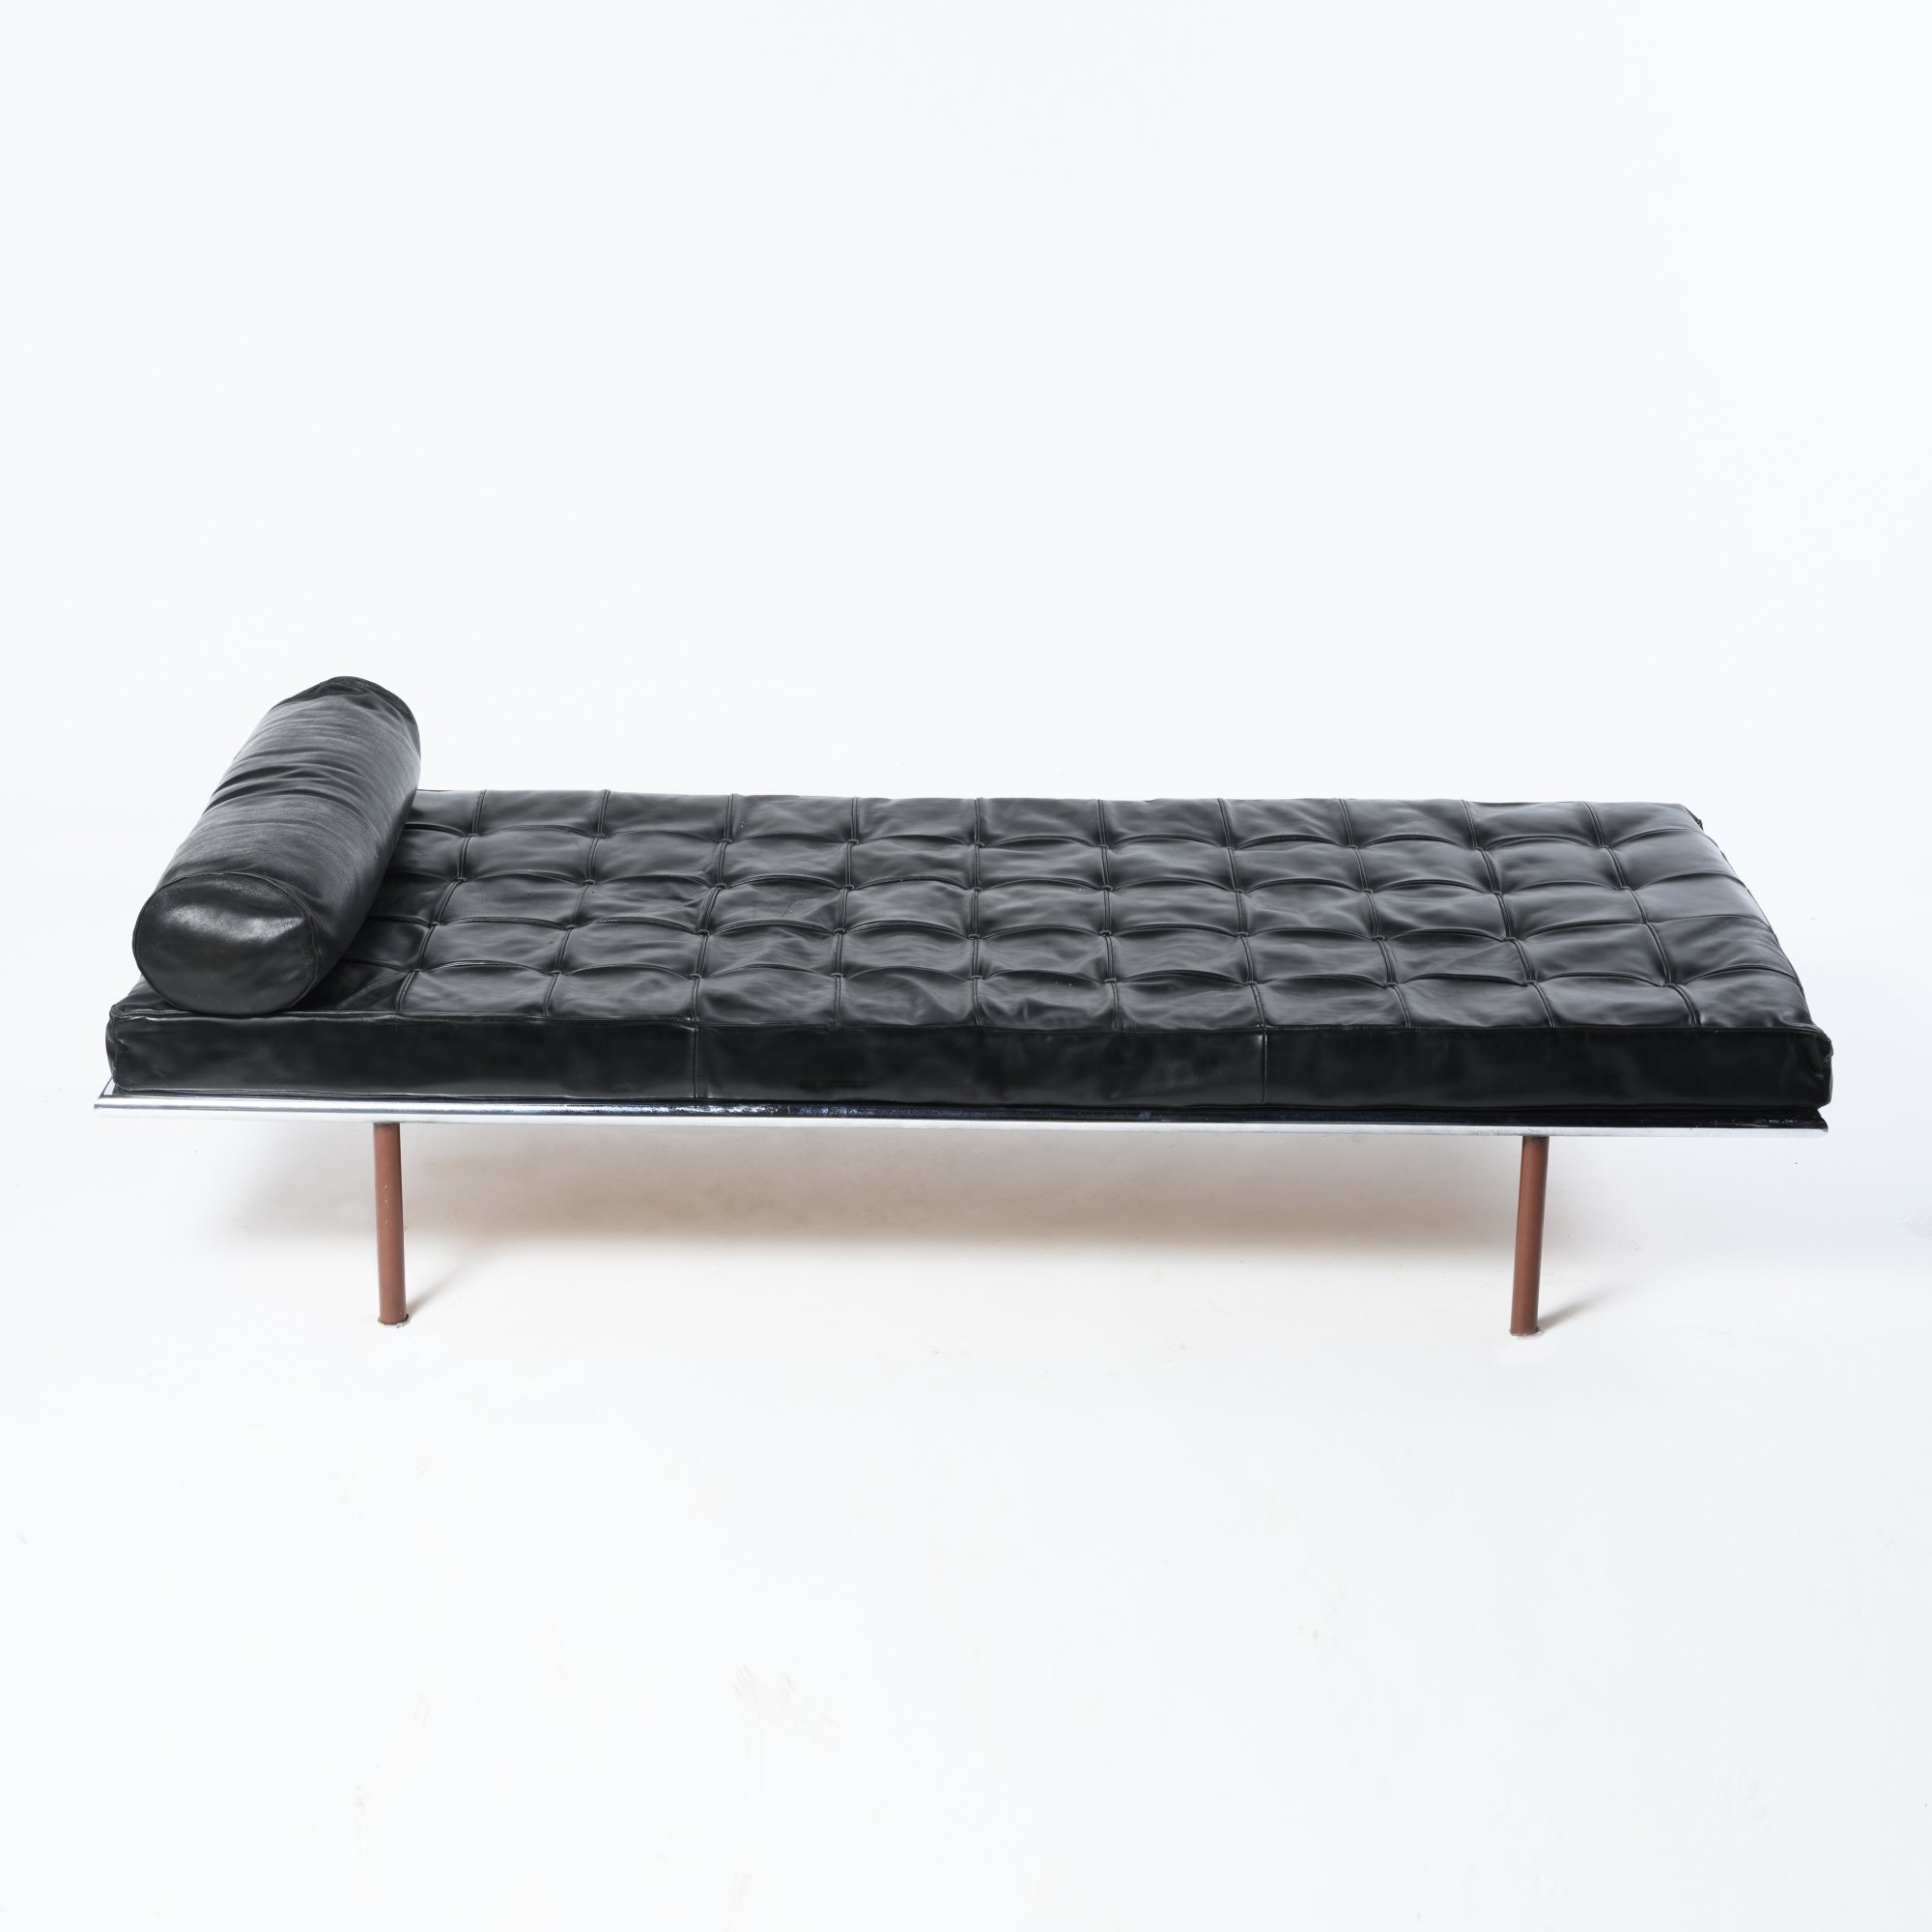 'Barcelona' daybed by Ludwig Mies van der Rohe, 1929